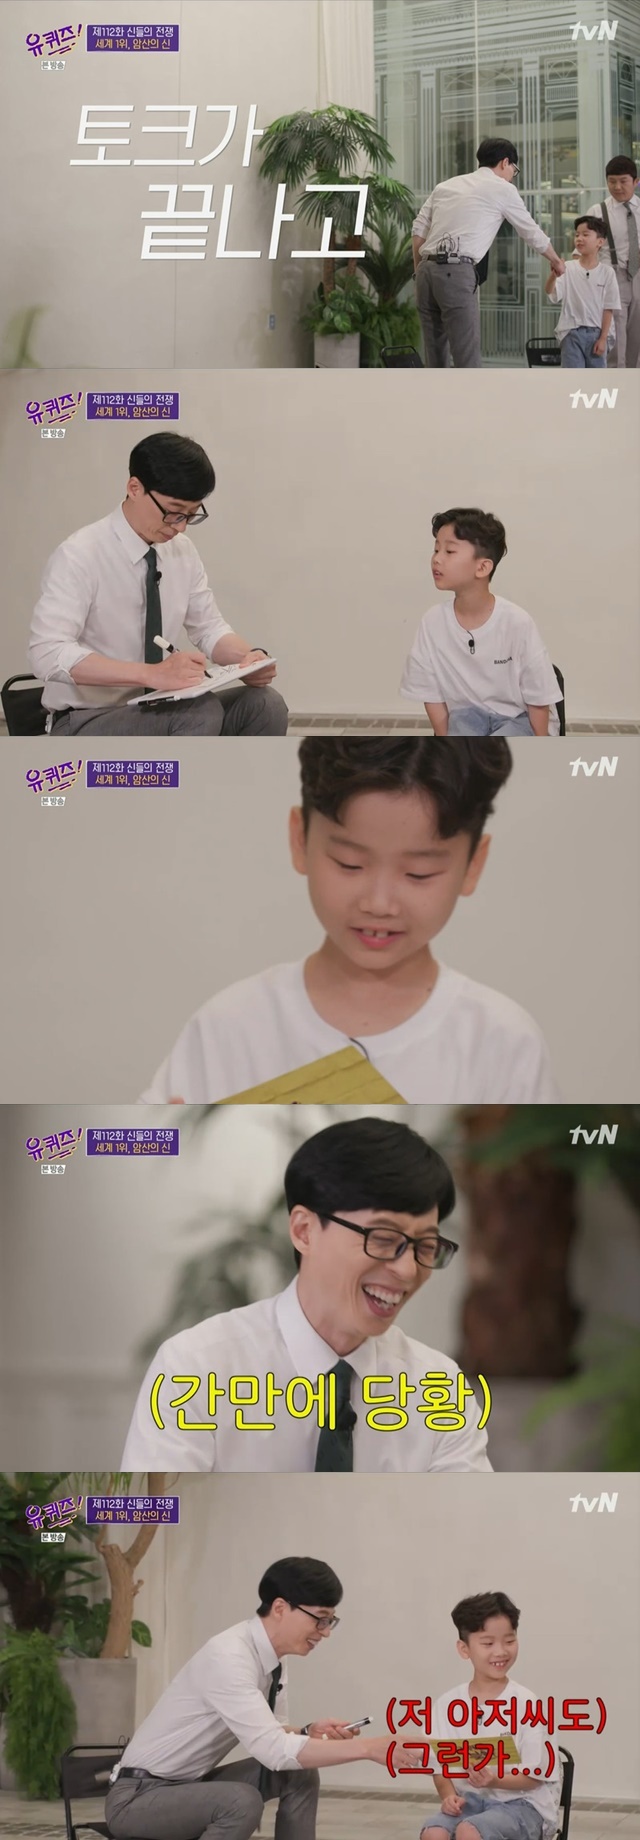 Yoo Jae-Suk burst into laughter as he gave Signs to Goh Kun-woo ChildOn TVN You Quiz on the Block broadcast on June 23, the 112th The War of the Gods was held.On this day, Goh Kun-woo, a second grade elementary school student in Amsan, appeared and was surprised to say that he knew Yoo Jae-Suk in the Great Hall.After the talk, Goh Kun-woo asked Yoo Jae-Suk to Signs me, and Yoo Jae-Suk gave signs that he was sure.